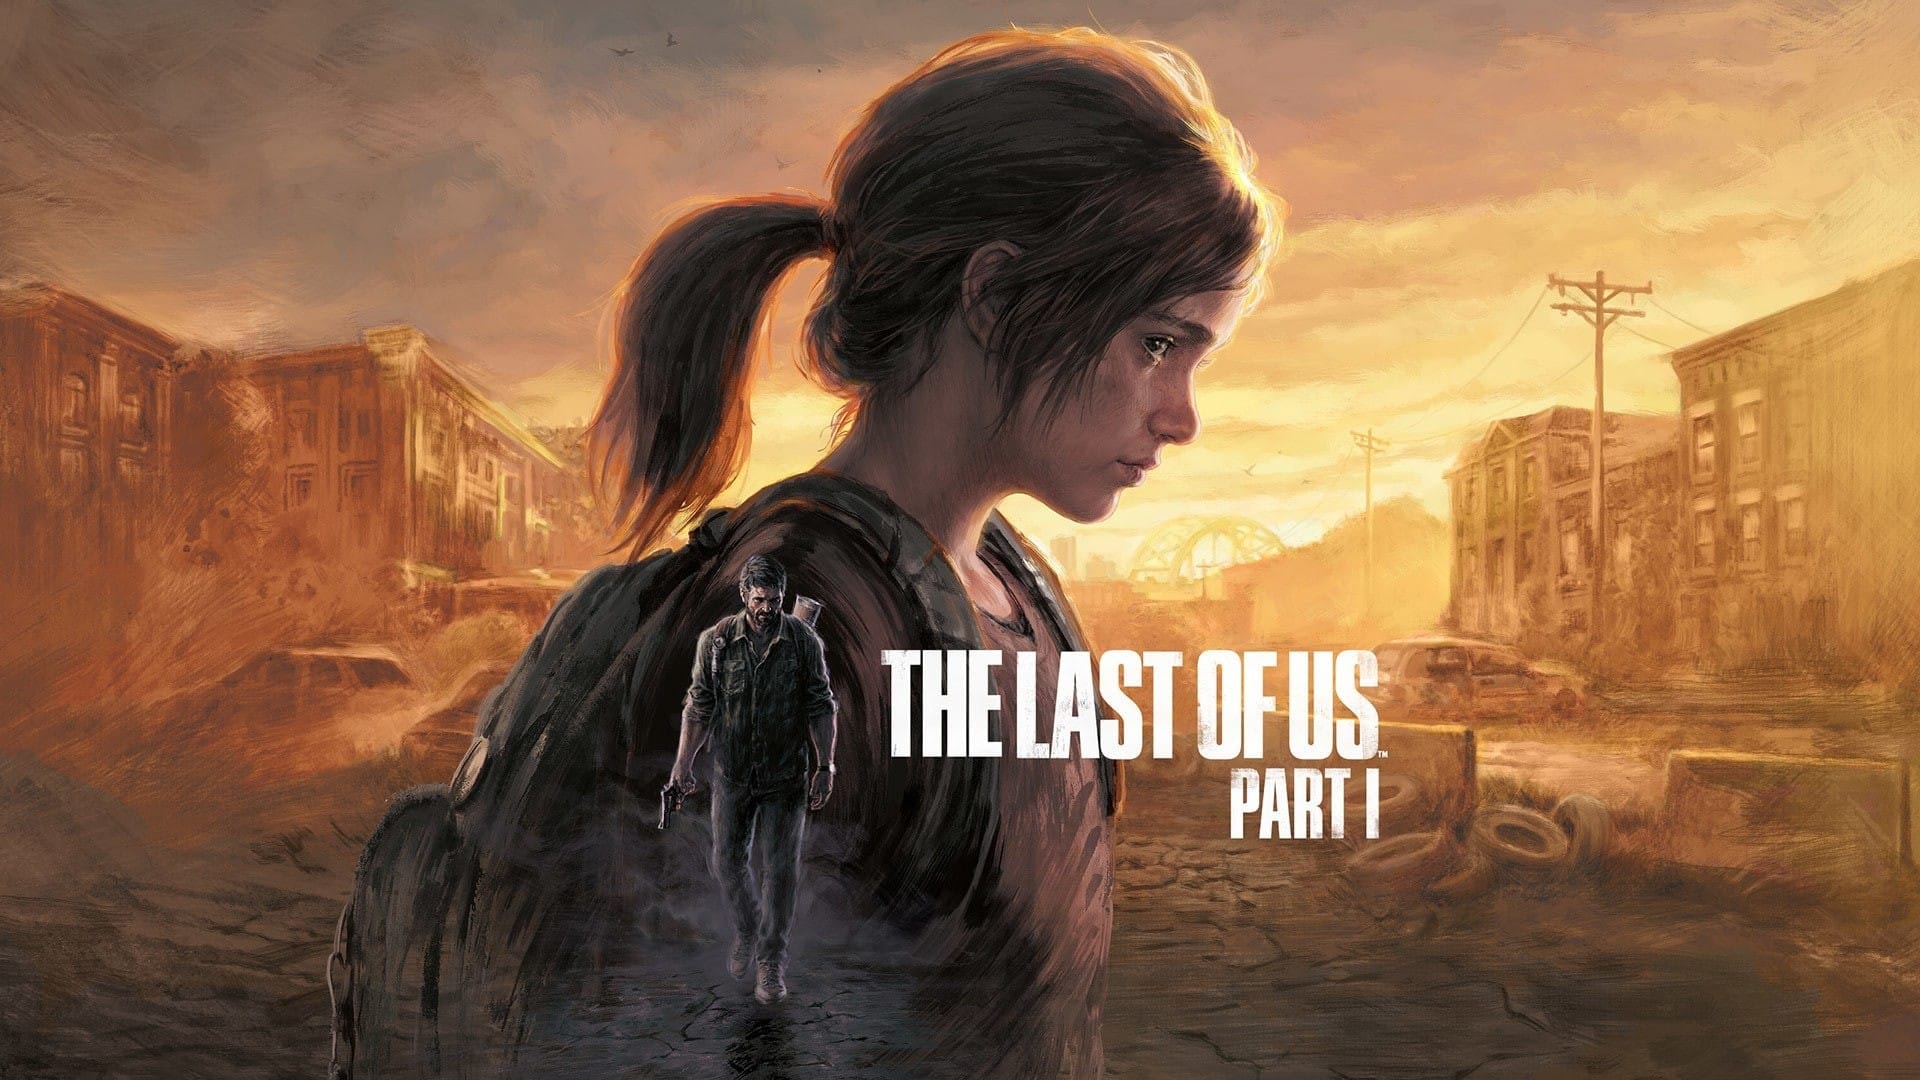 The Last of Us Part I: vale a pena?